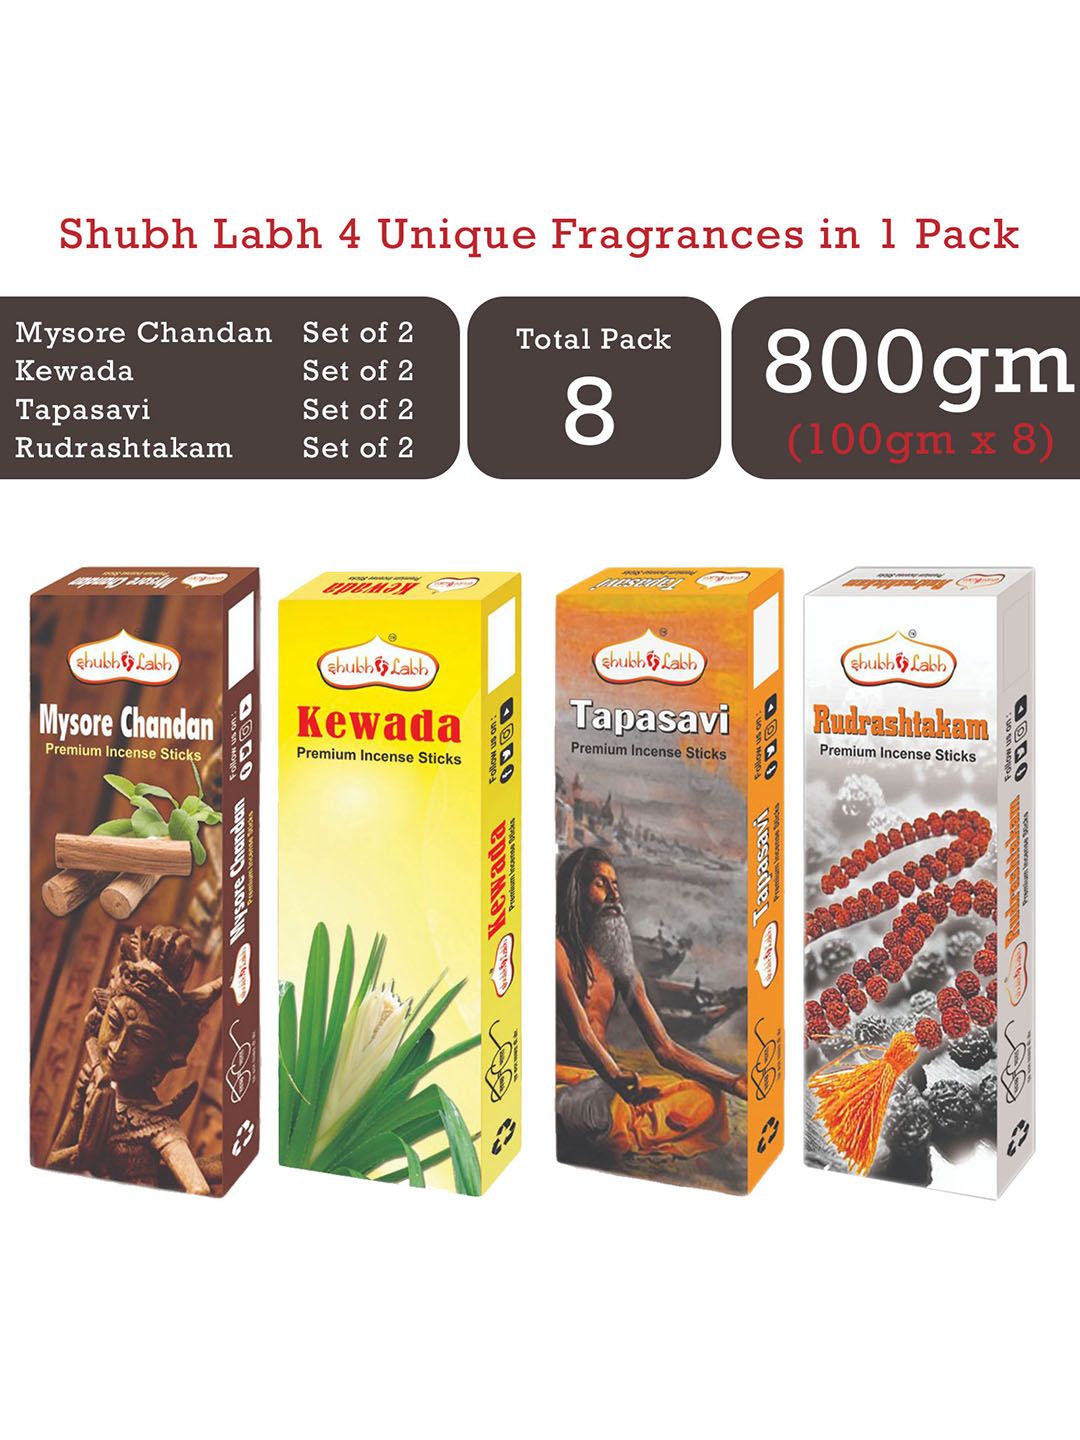 Shubh Labh Set Of 8 Black Incense Sticks Price in India